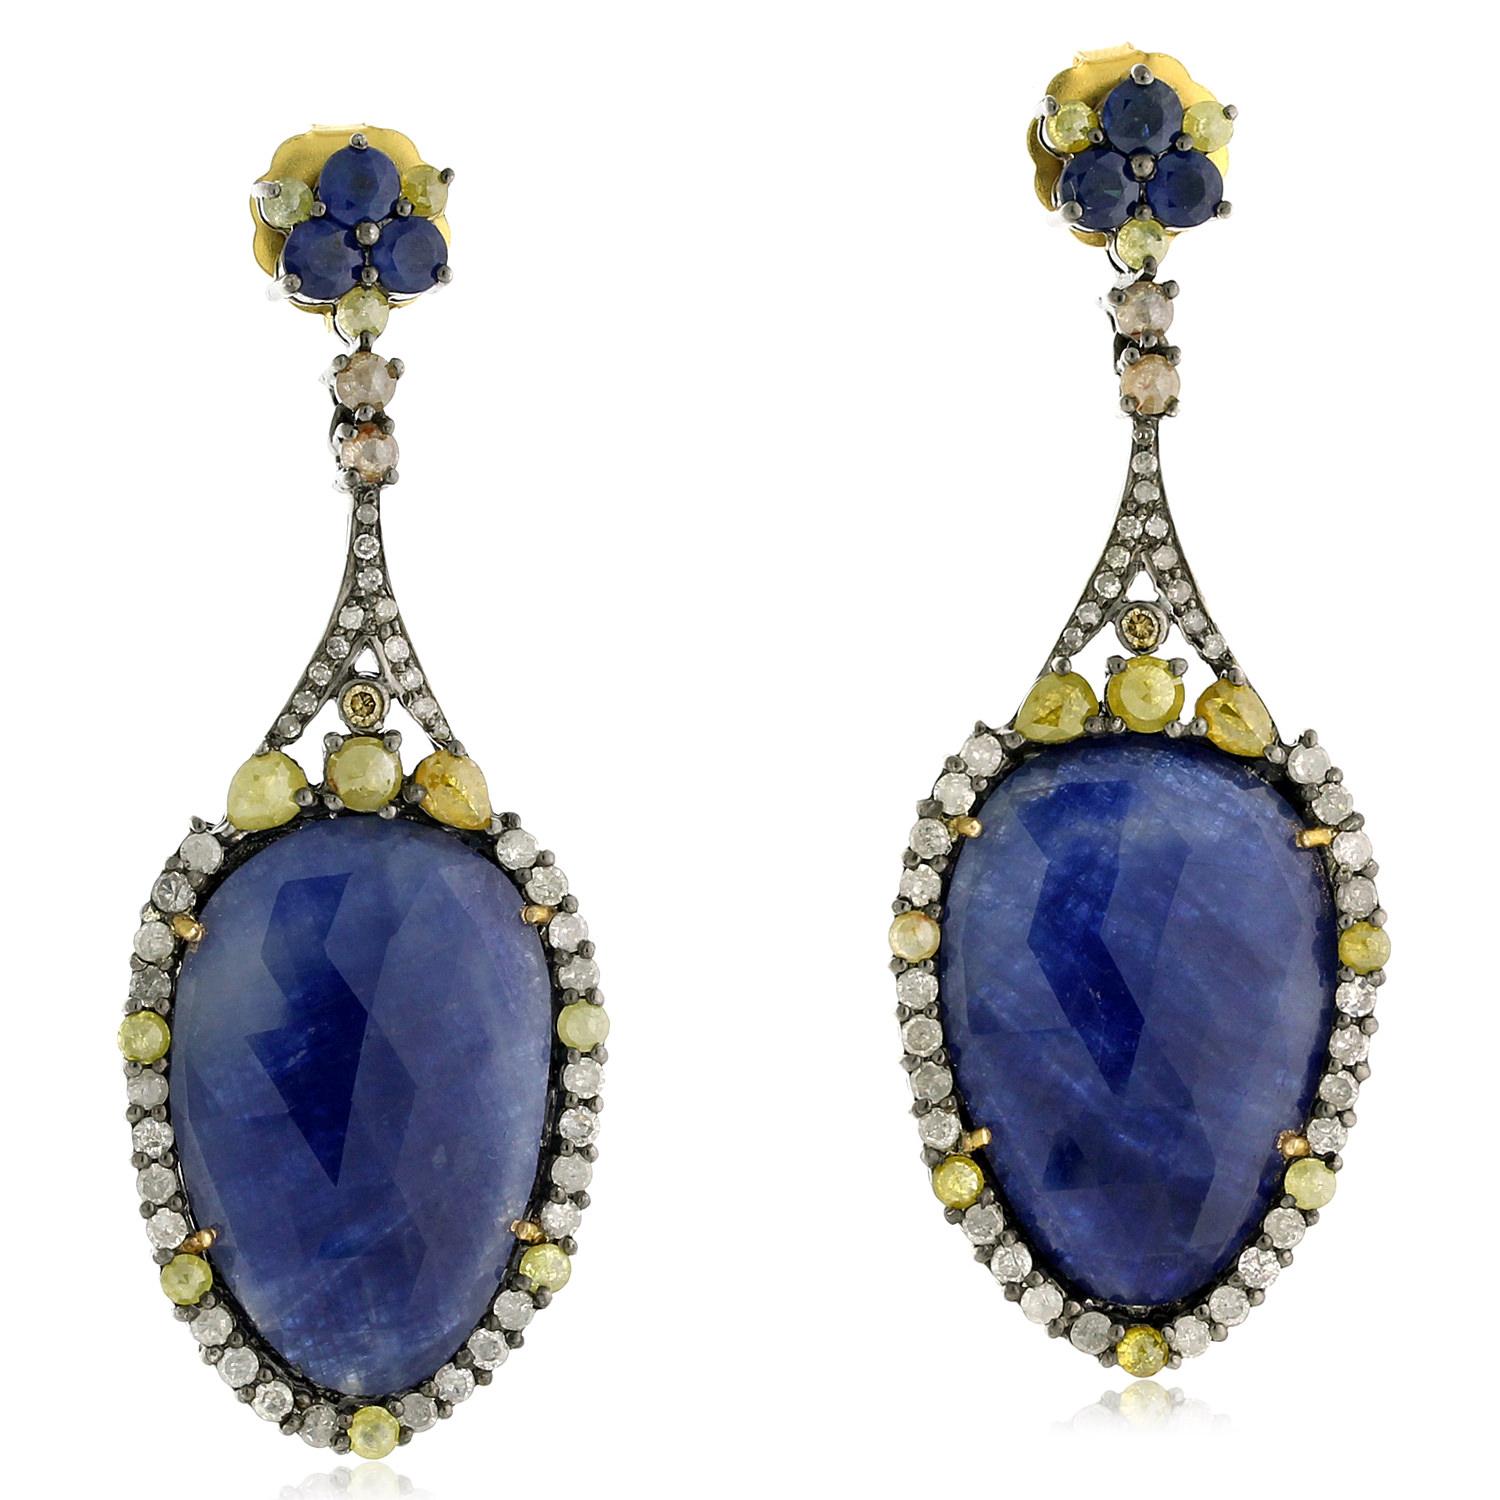 Pear Shaped Sapphire Dangle Earring With Pave Diamonds Made In 18k Gold & Silver In New Condition For Sale In New York, NY